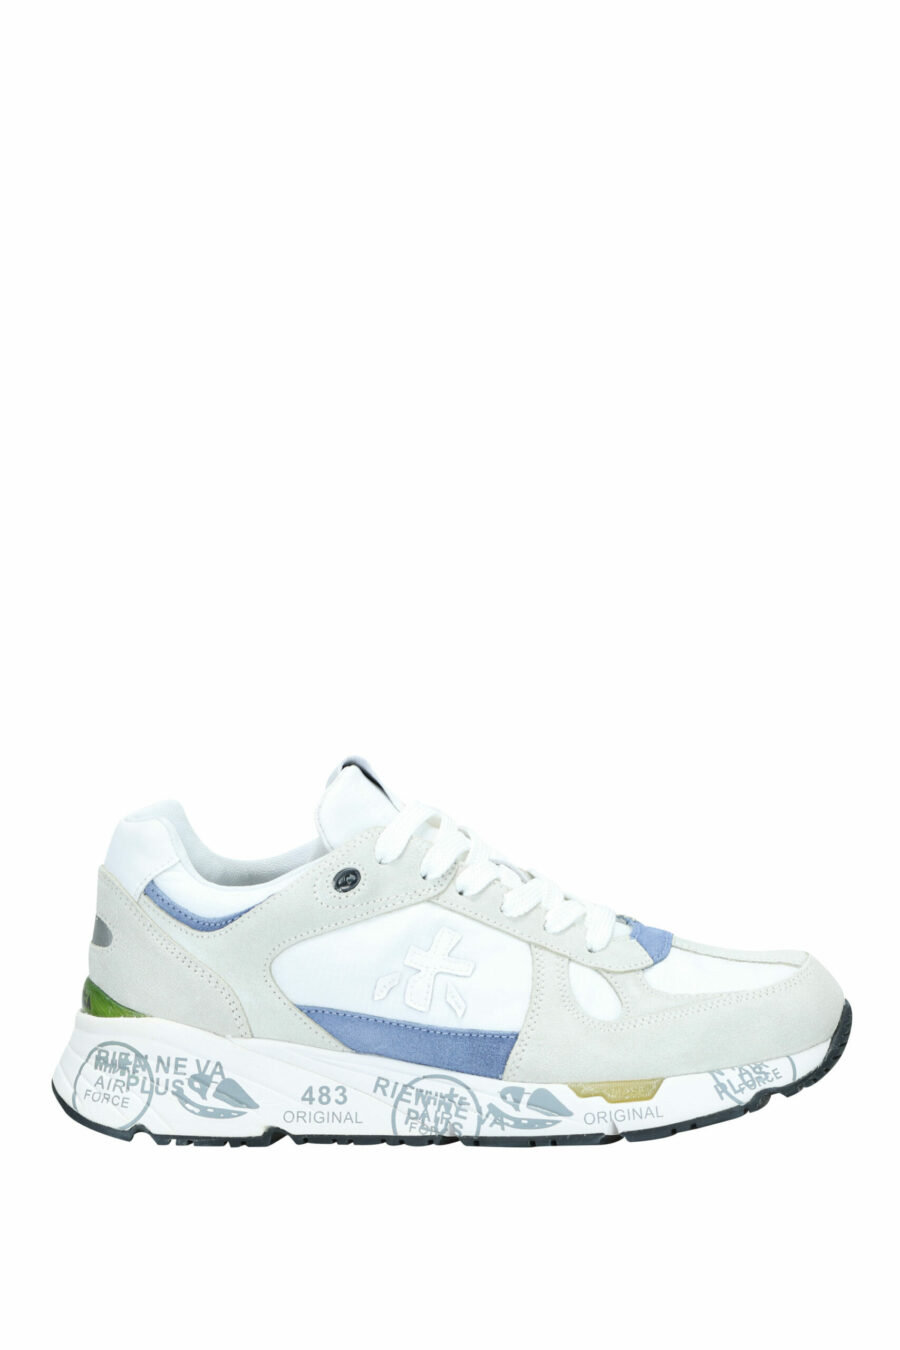 White trainers with blue and green detail "Mase 6625" - 8053680270296 scaled